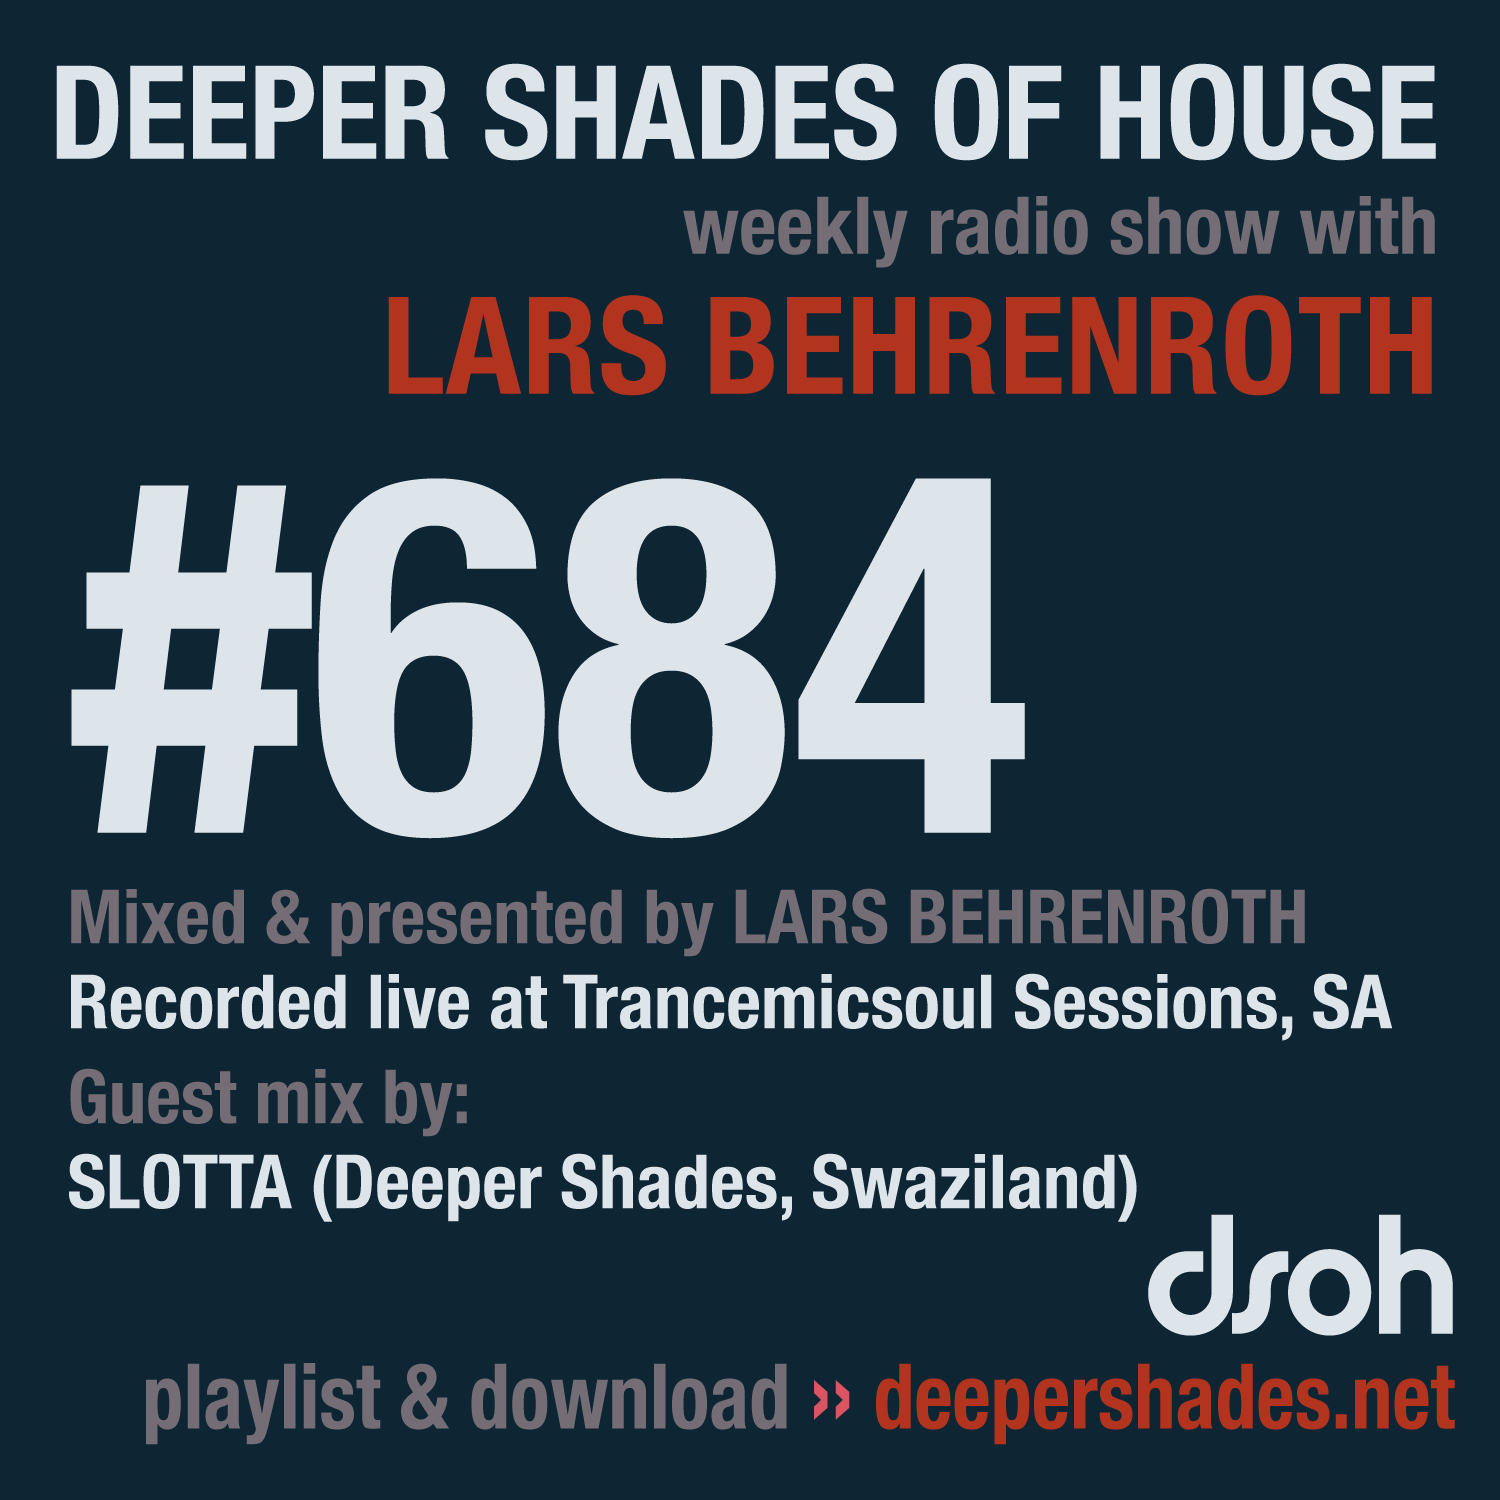 Deeper Shades Of House 684